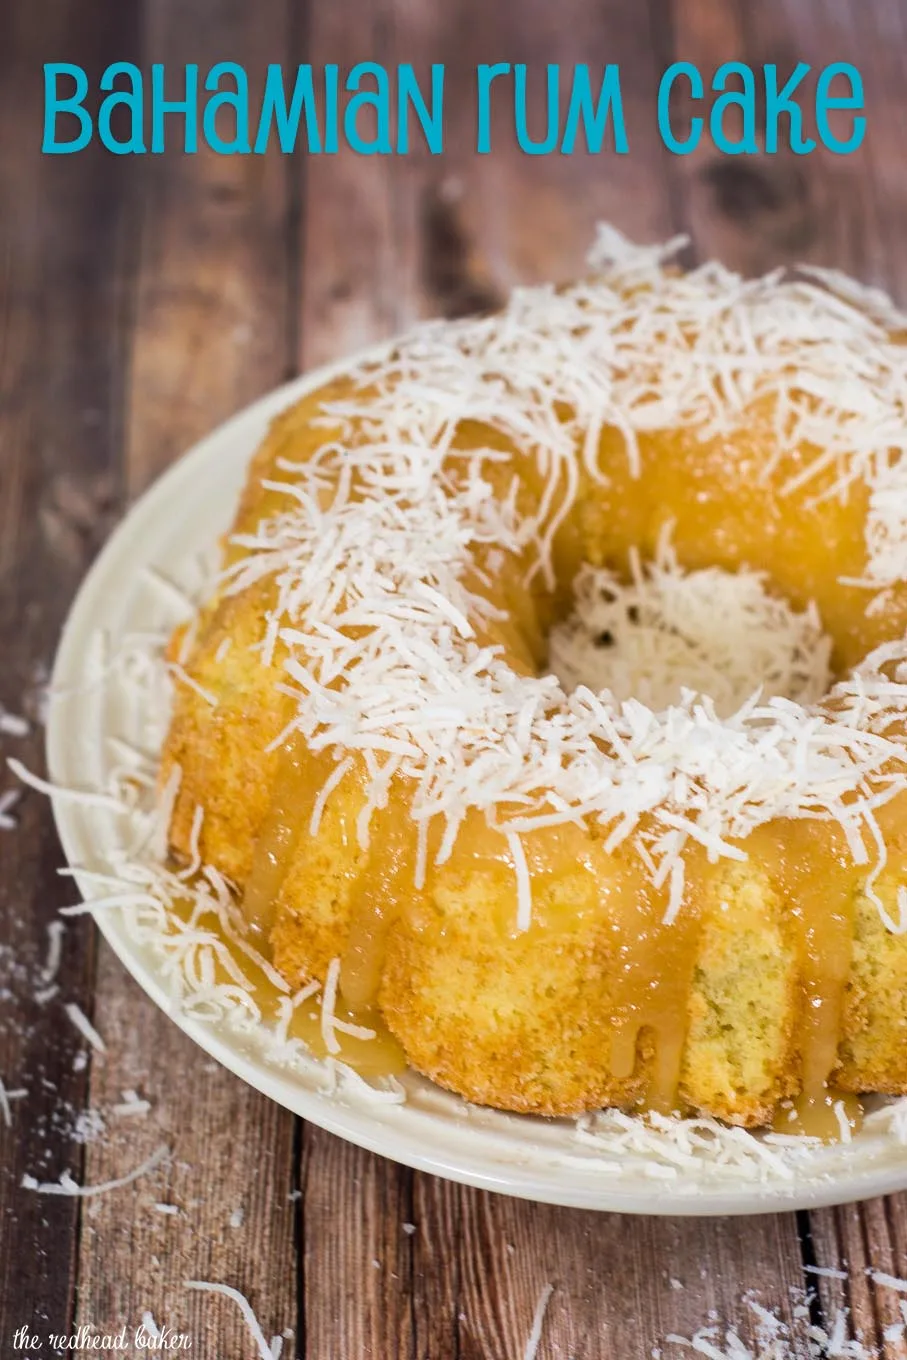 Since most of the world's rum is produced in the islands of the Caribbean, the liquor is found in many dishes native to The Bahamas. One of those is rum cake, a buttery treat with a strong rum flavor. #ProgressiveEats